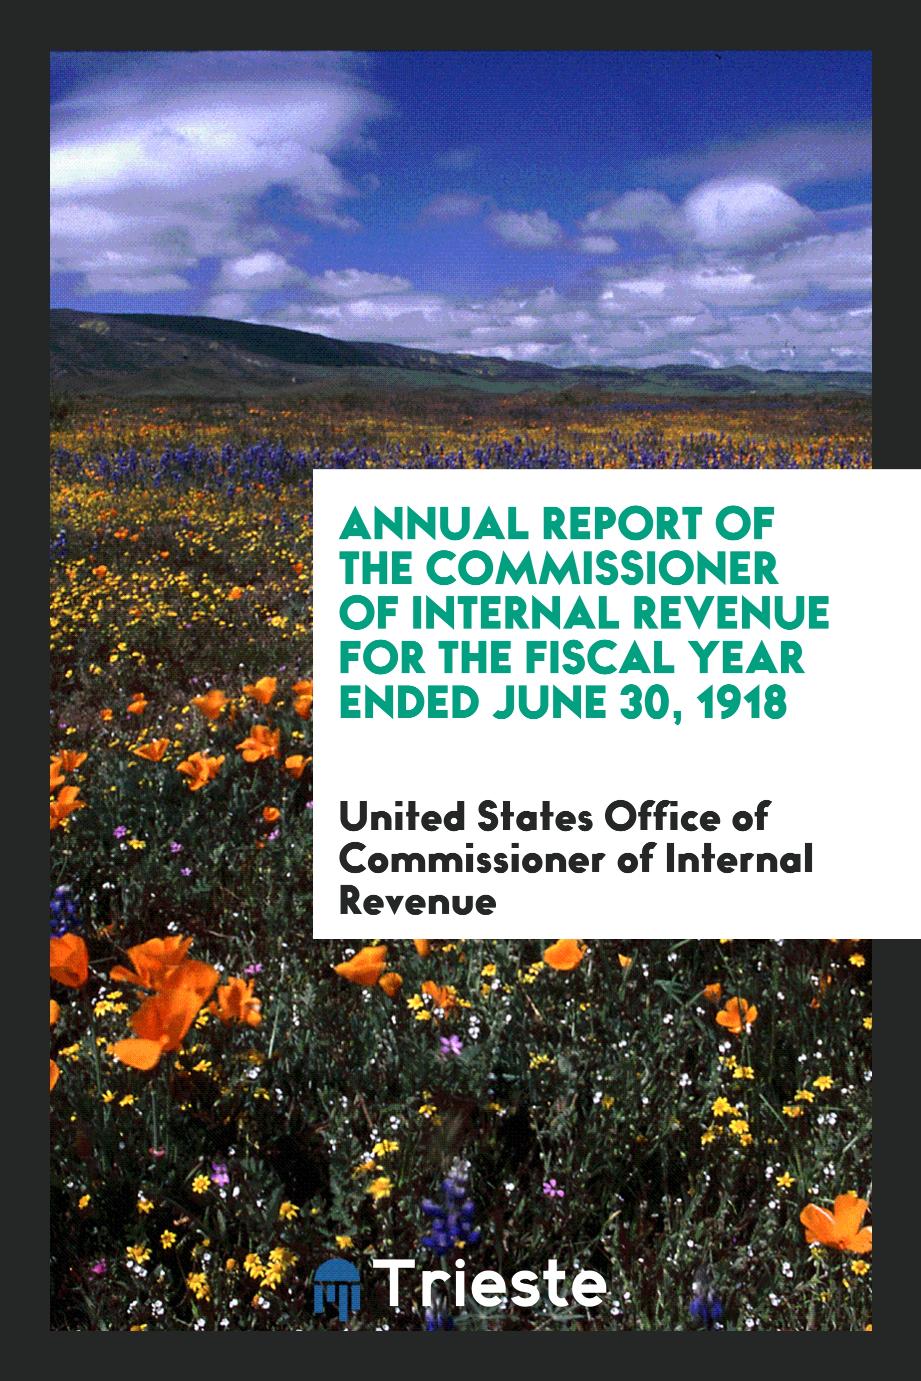 Annual Report of the Commissioner of Internal Revenue for the Fiscal Year Ended June 30, 1918